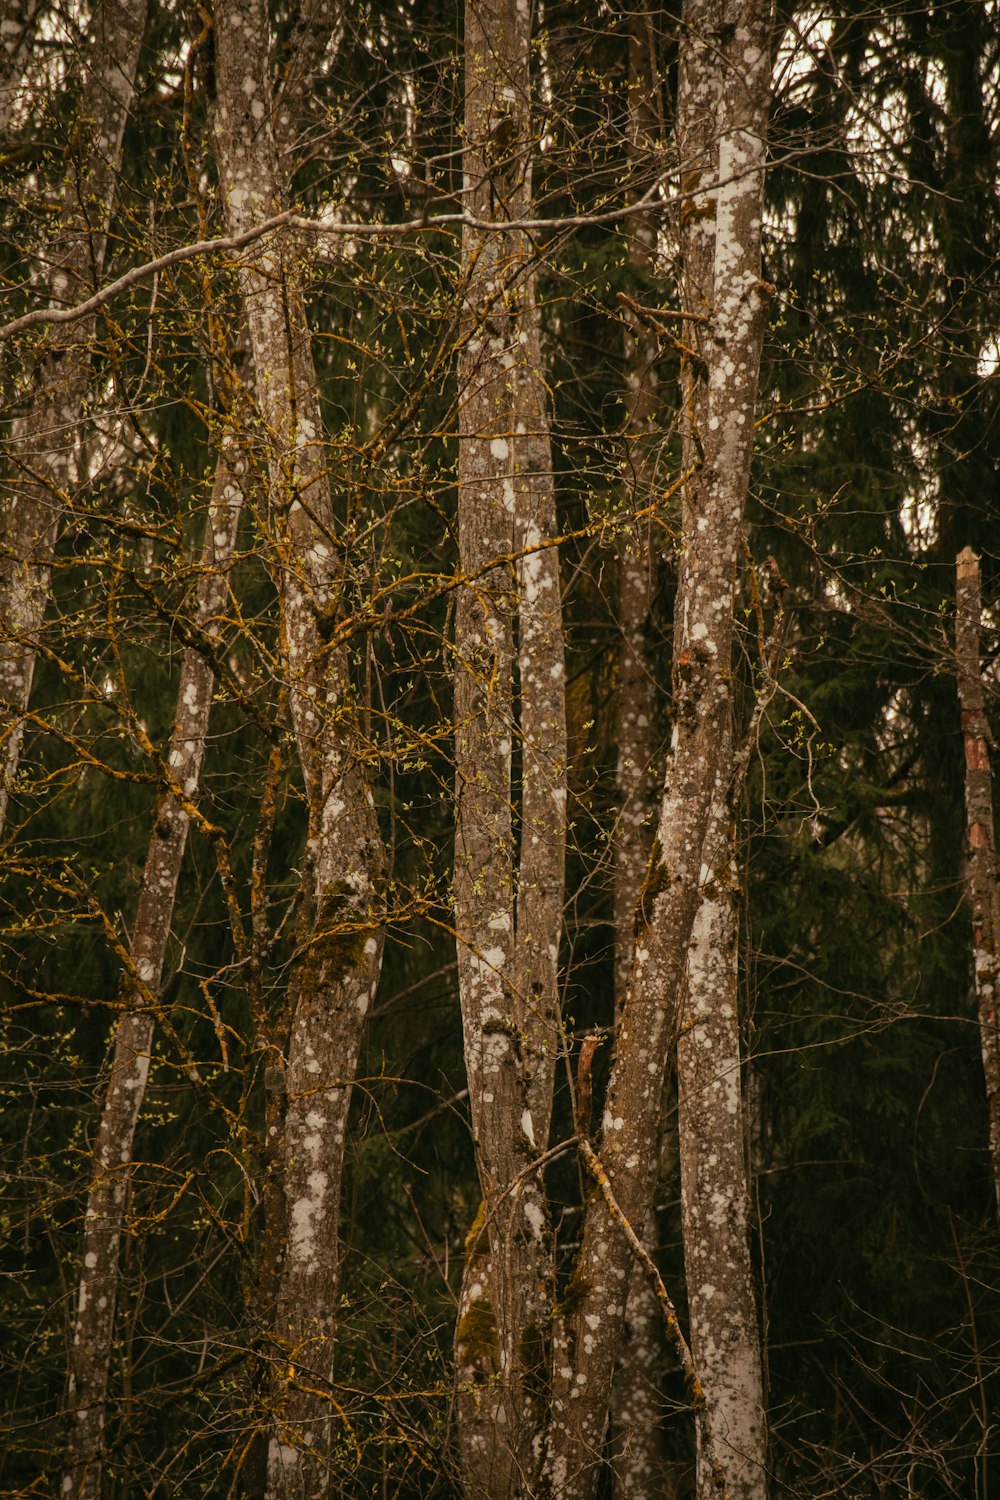 a group of tall trees in a forest